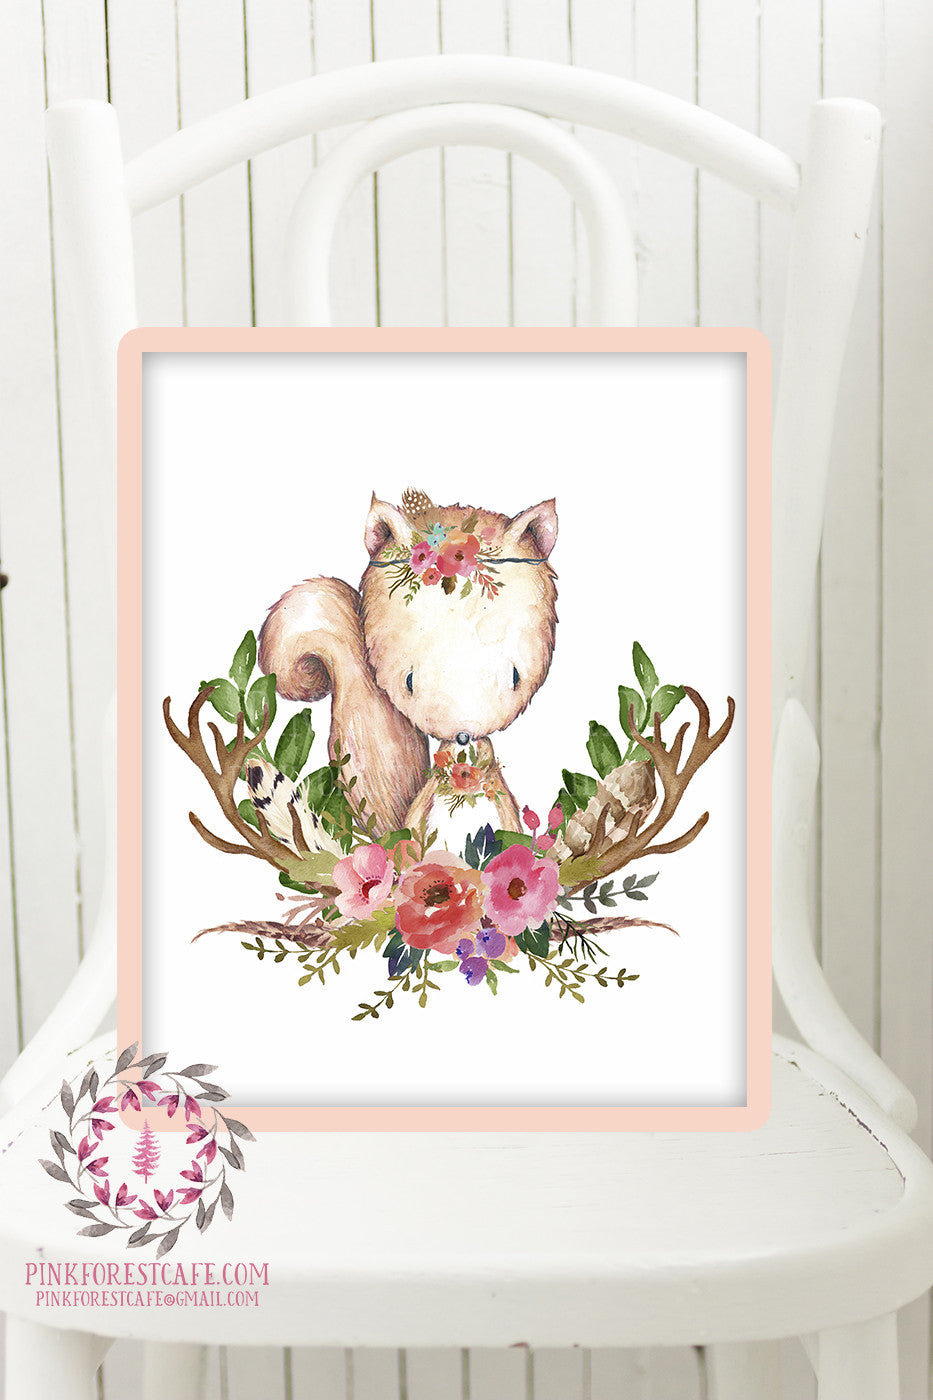 Squirrel Woodland Boho Printable Print Wall Art Baby Nursery Feather Antlers Watercolor Bohemian Floral Girl Room Decor